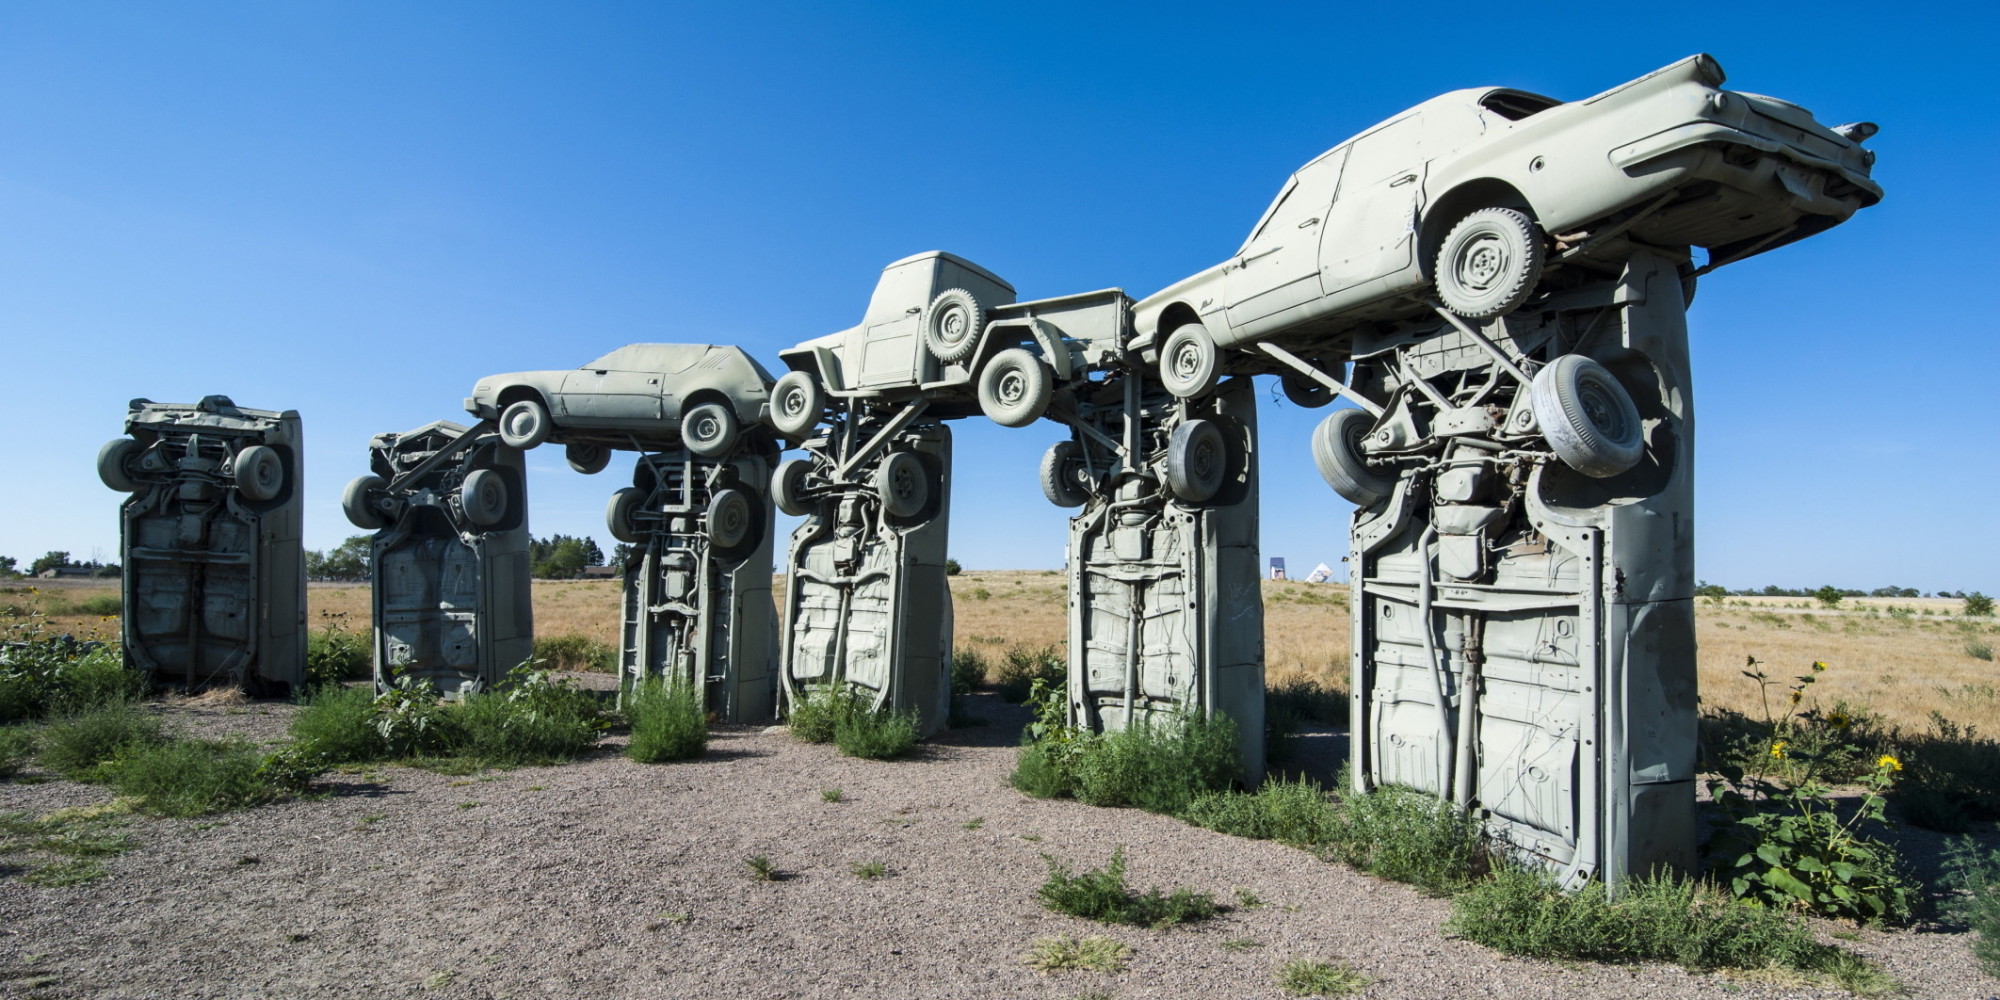 This Roadside Attraction In North Dakota Is The Most 